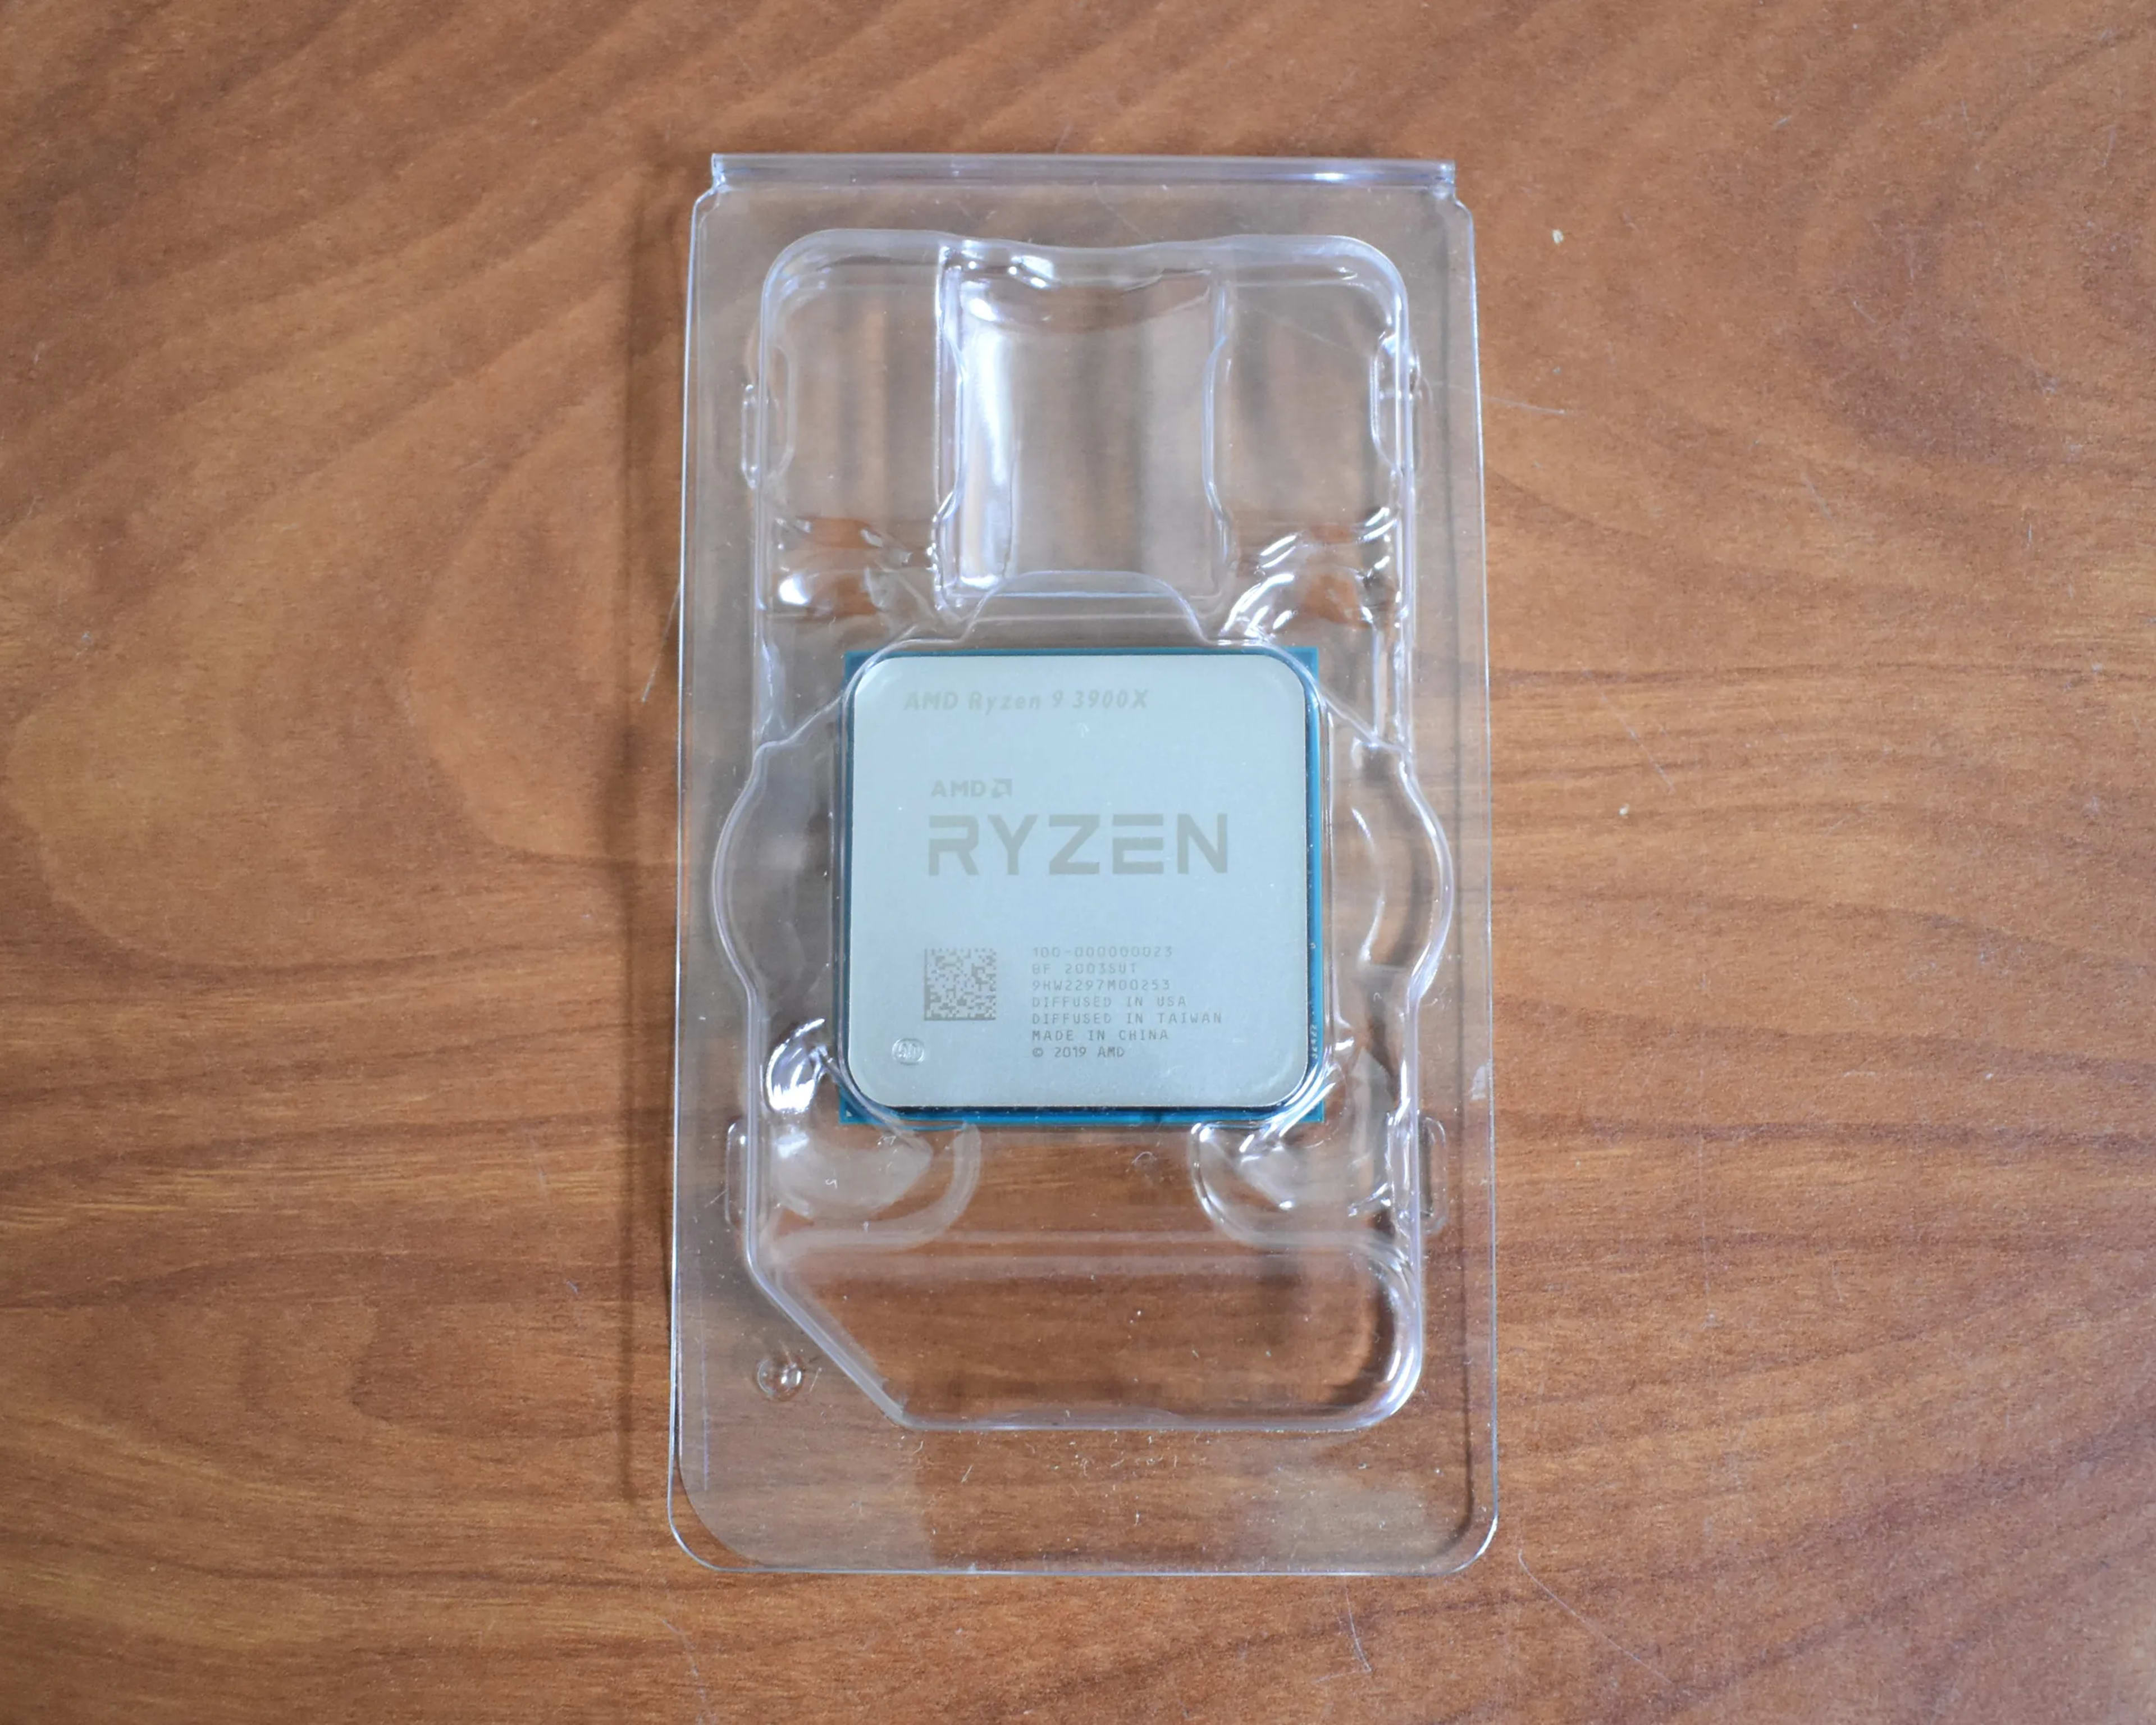 Ryzen 9 3900x - Cleaned and Tested